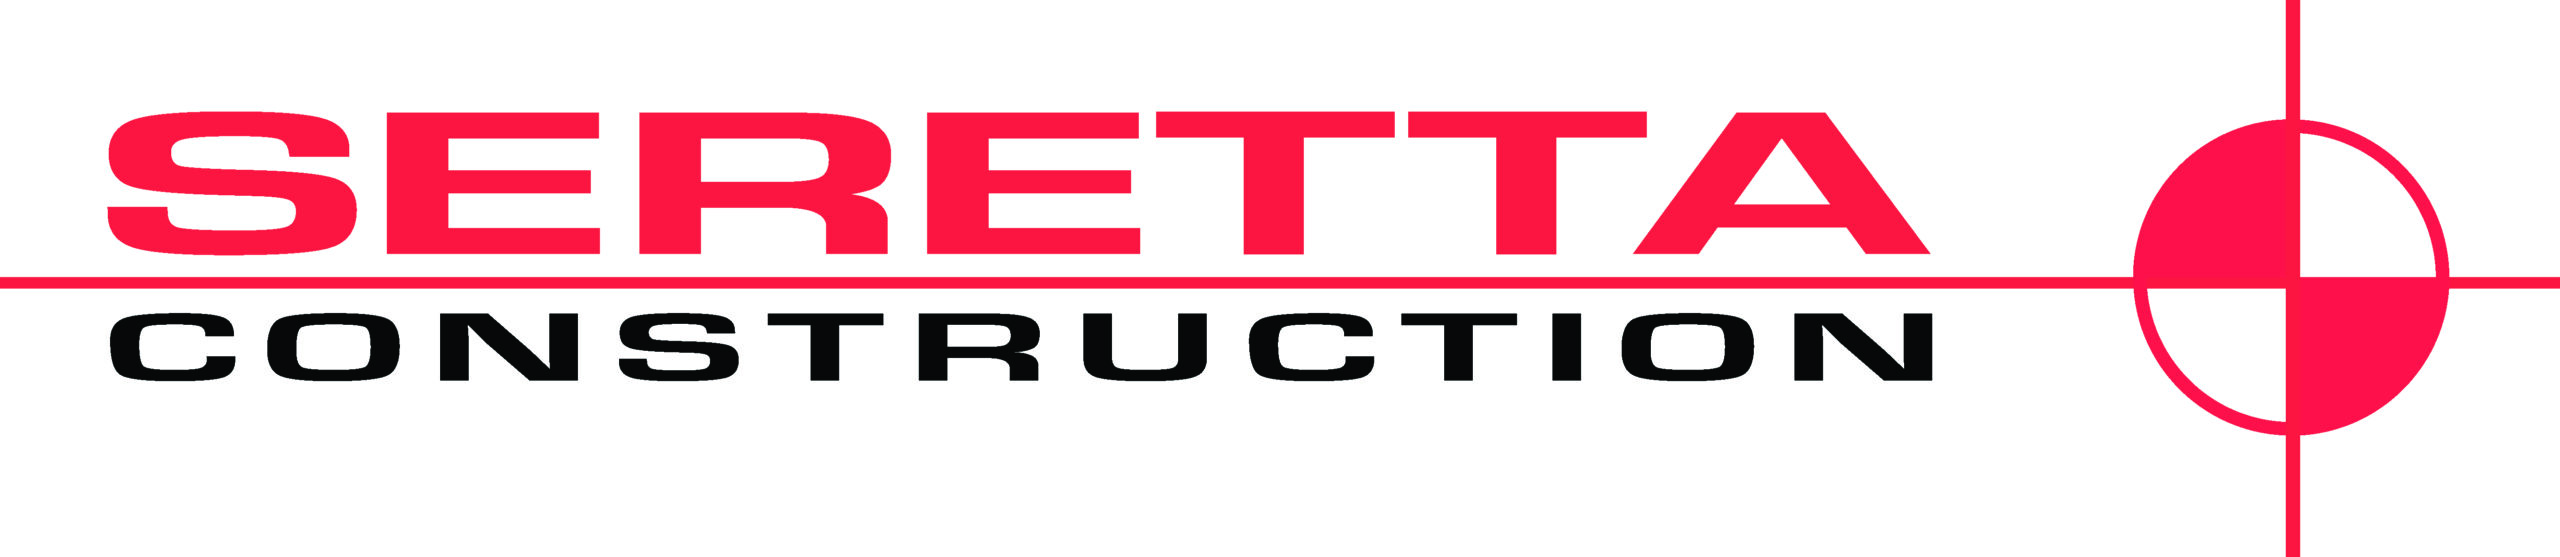 Seretta Construction - 35 Years in the business